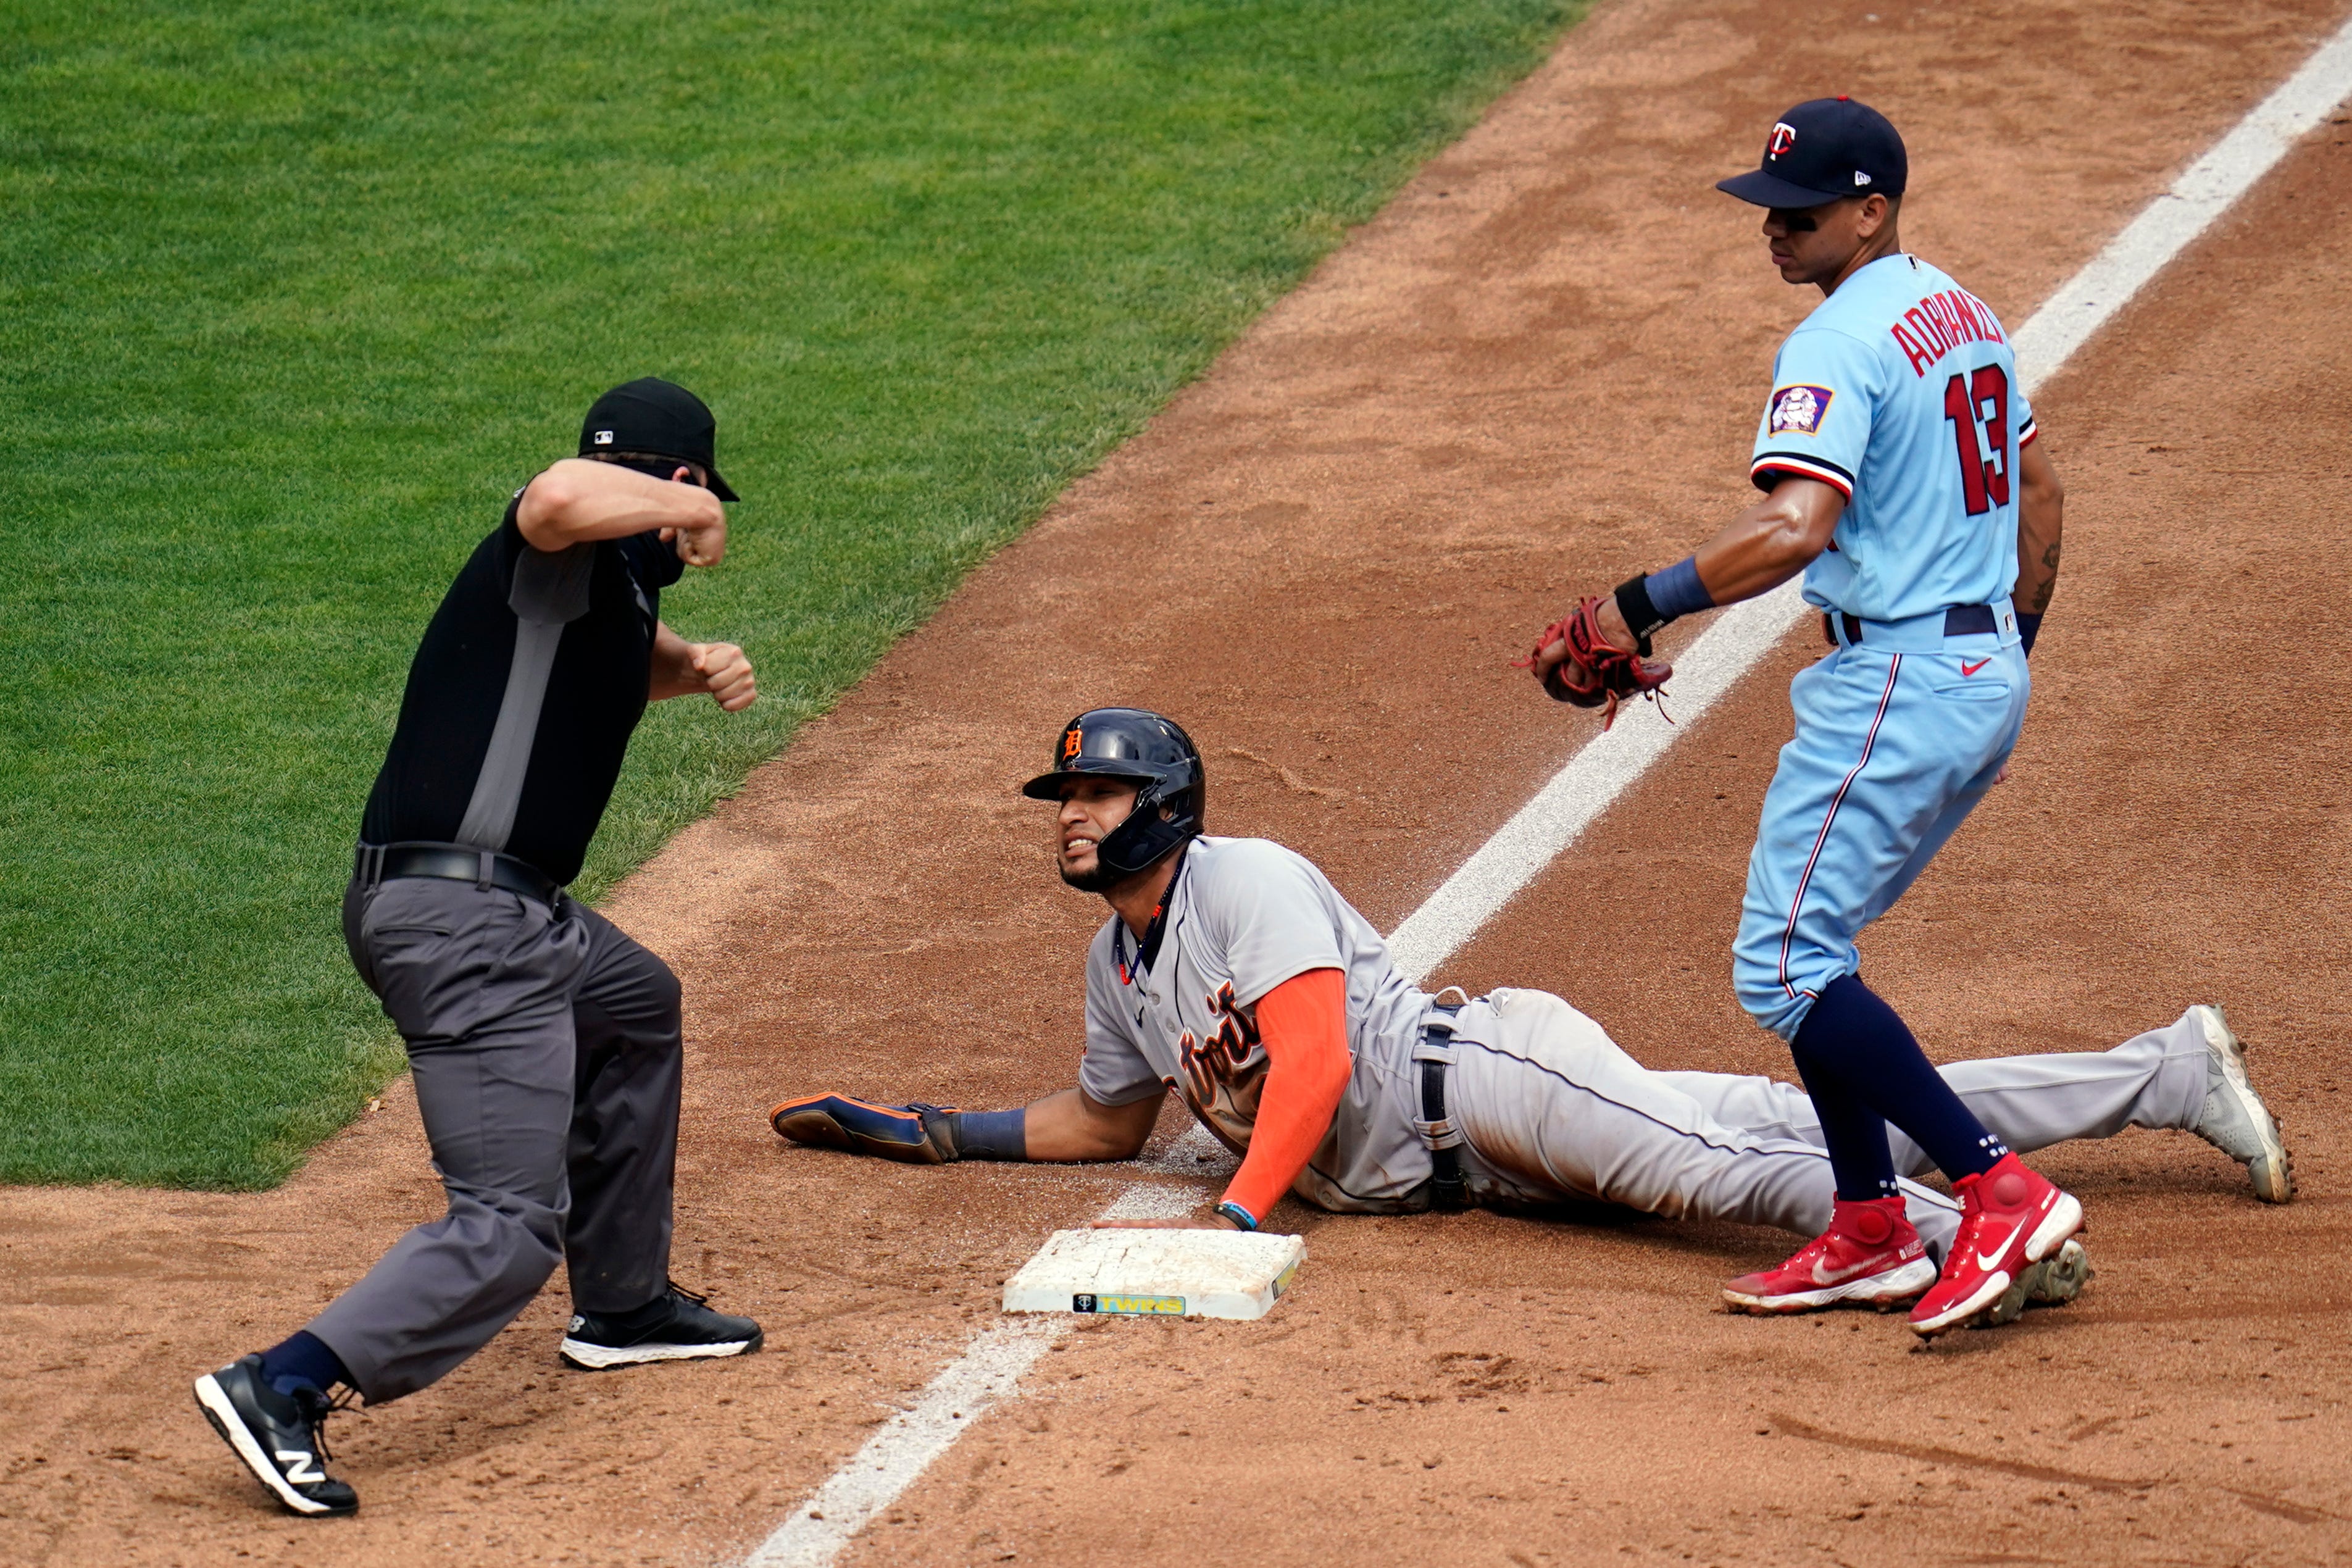 Third base umpire Chris Segal signals an out after Minnesota Twins third baseman Ehire Adrianza, right, tagged Detroit Tigers' Victor Reyes who was attempting to reach third after a Twins throwing error on a pickoff-attempt at first base in the fifth inning.